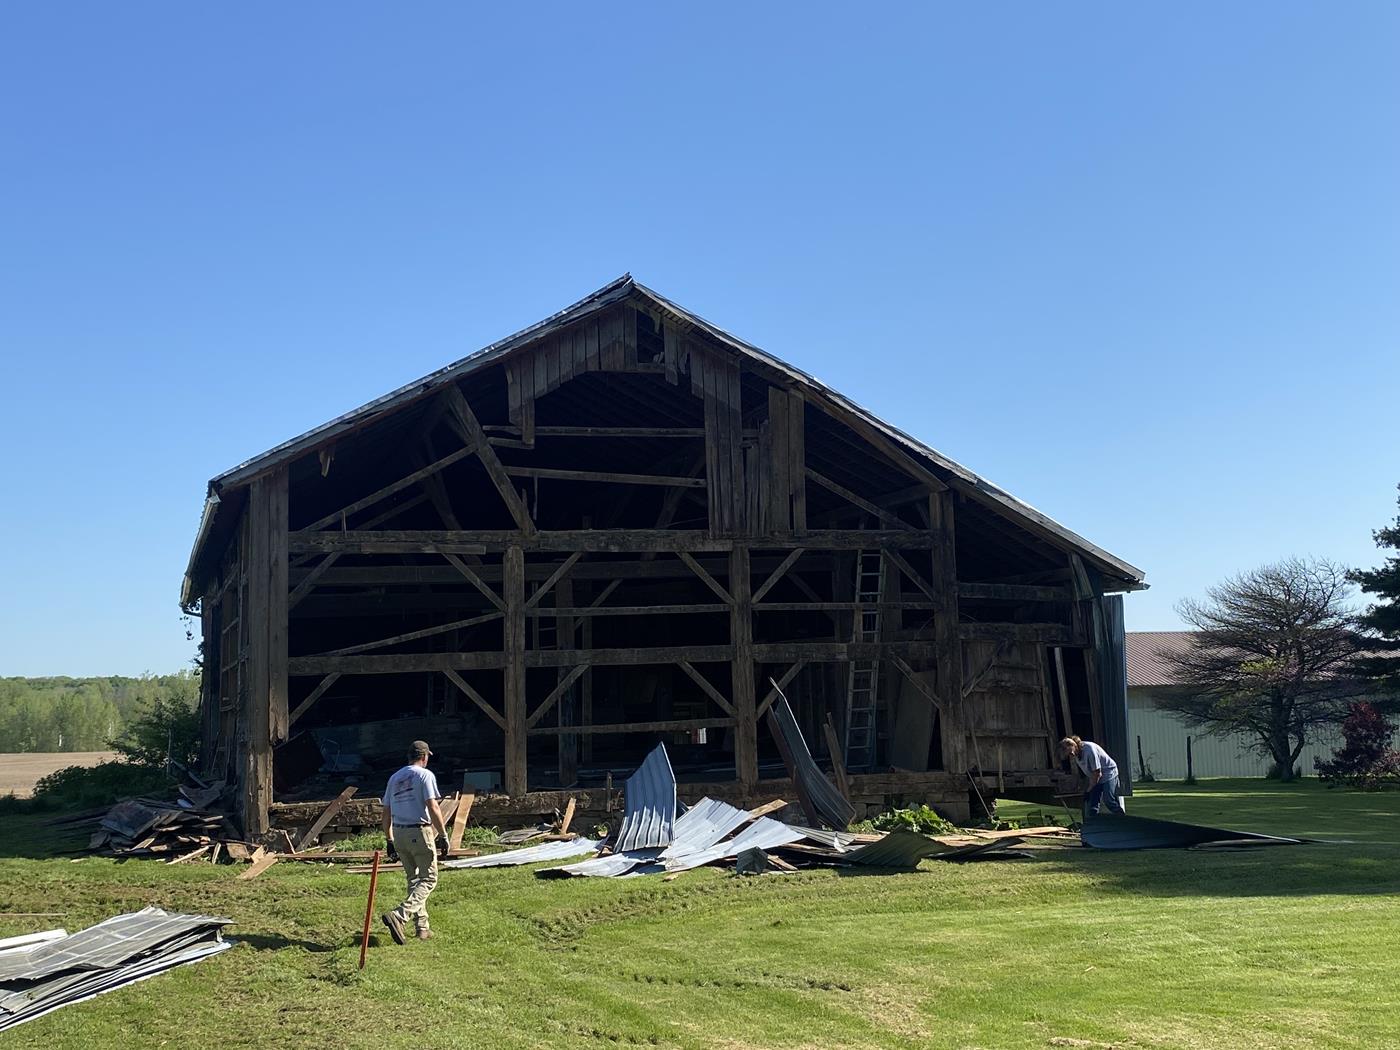 https://www.ohiovalleybarnsalvage.com/images/Harvey Barn Frame Ohio Valley Barn Salvage - Your Source For White Oak Hand-Hewn Timbers